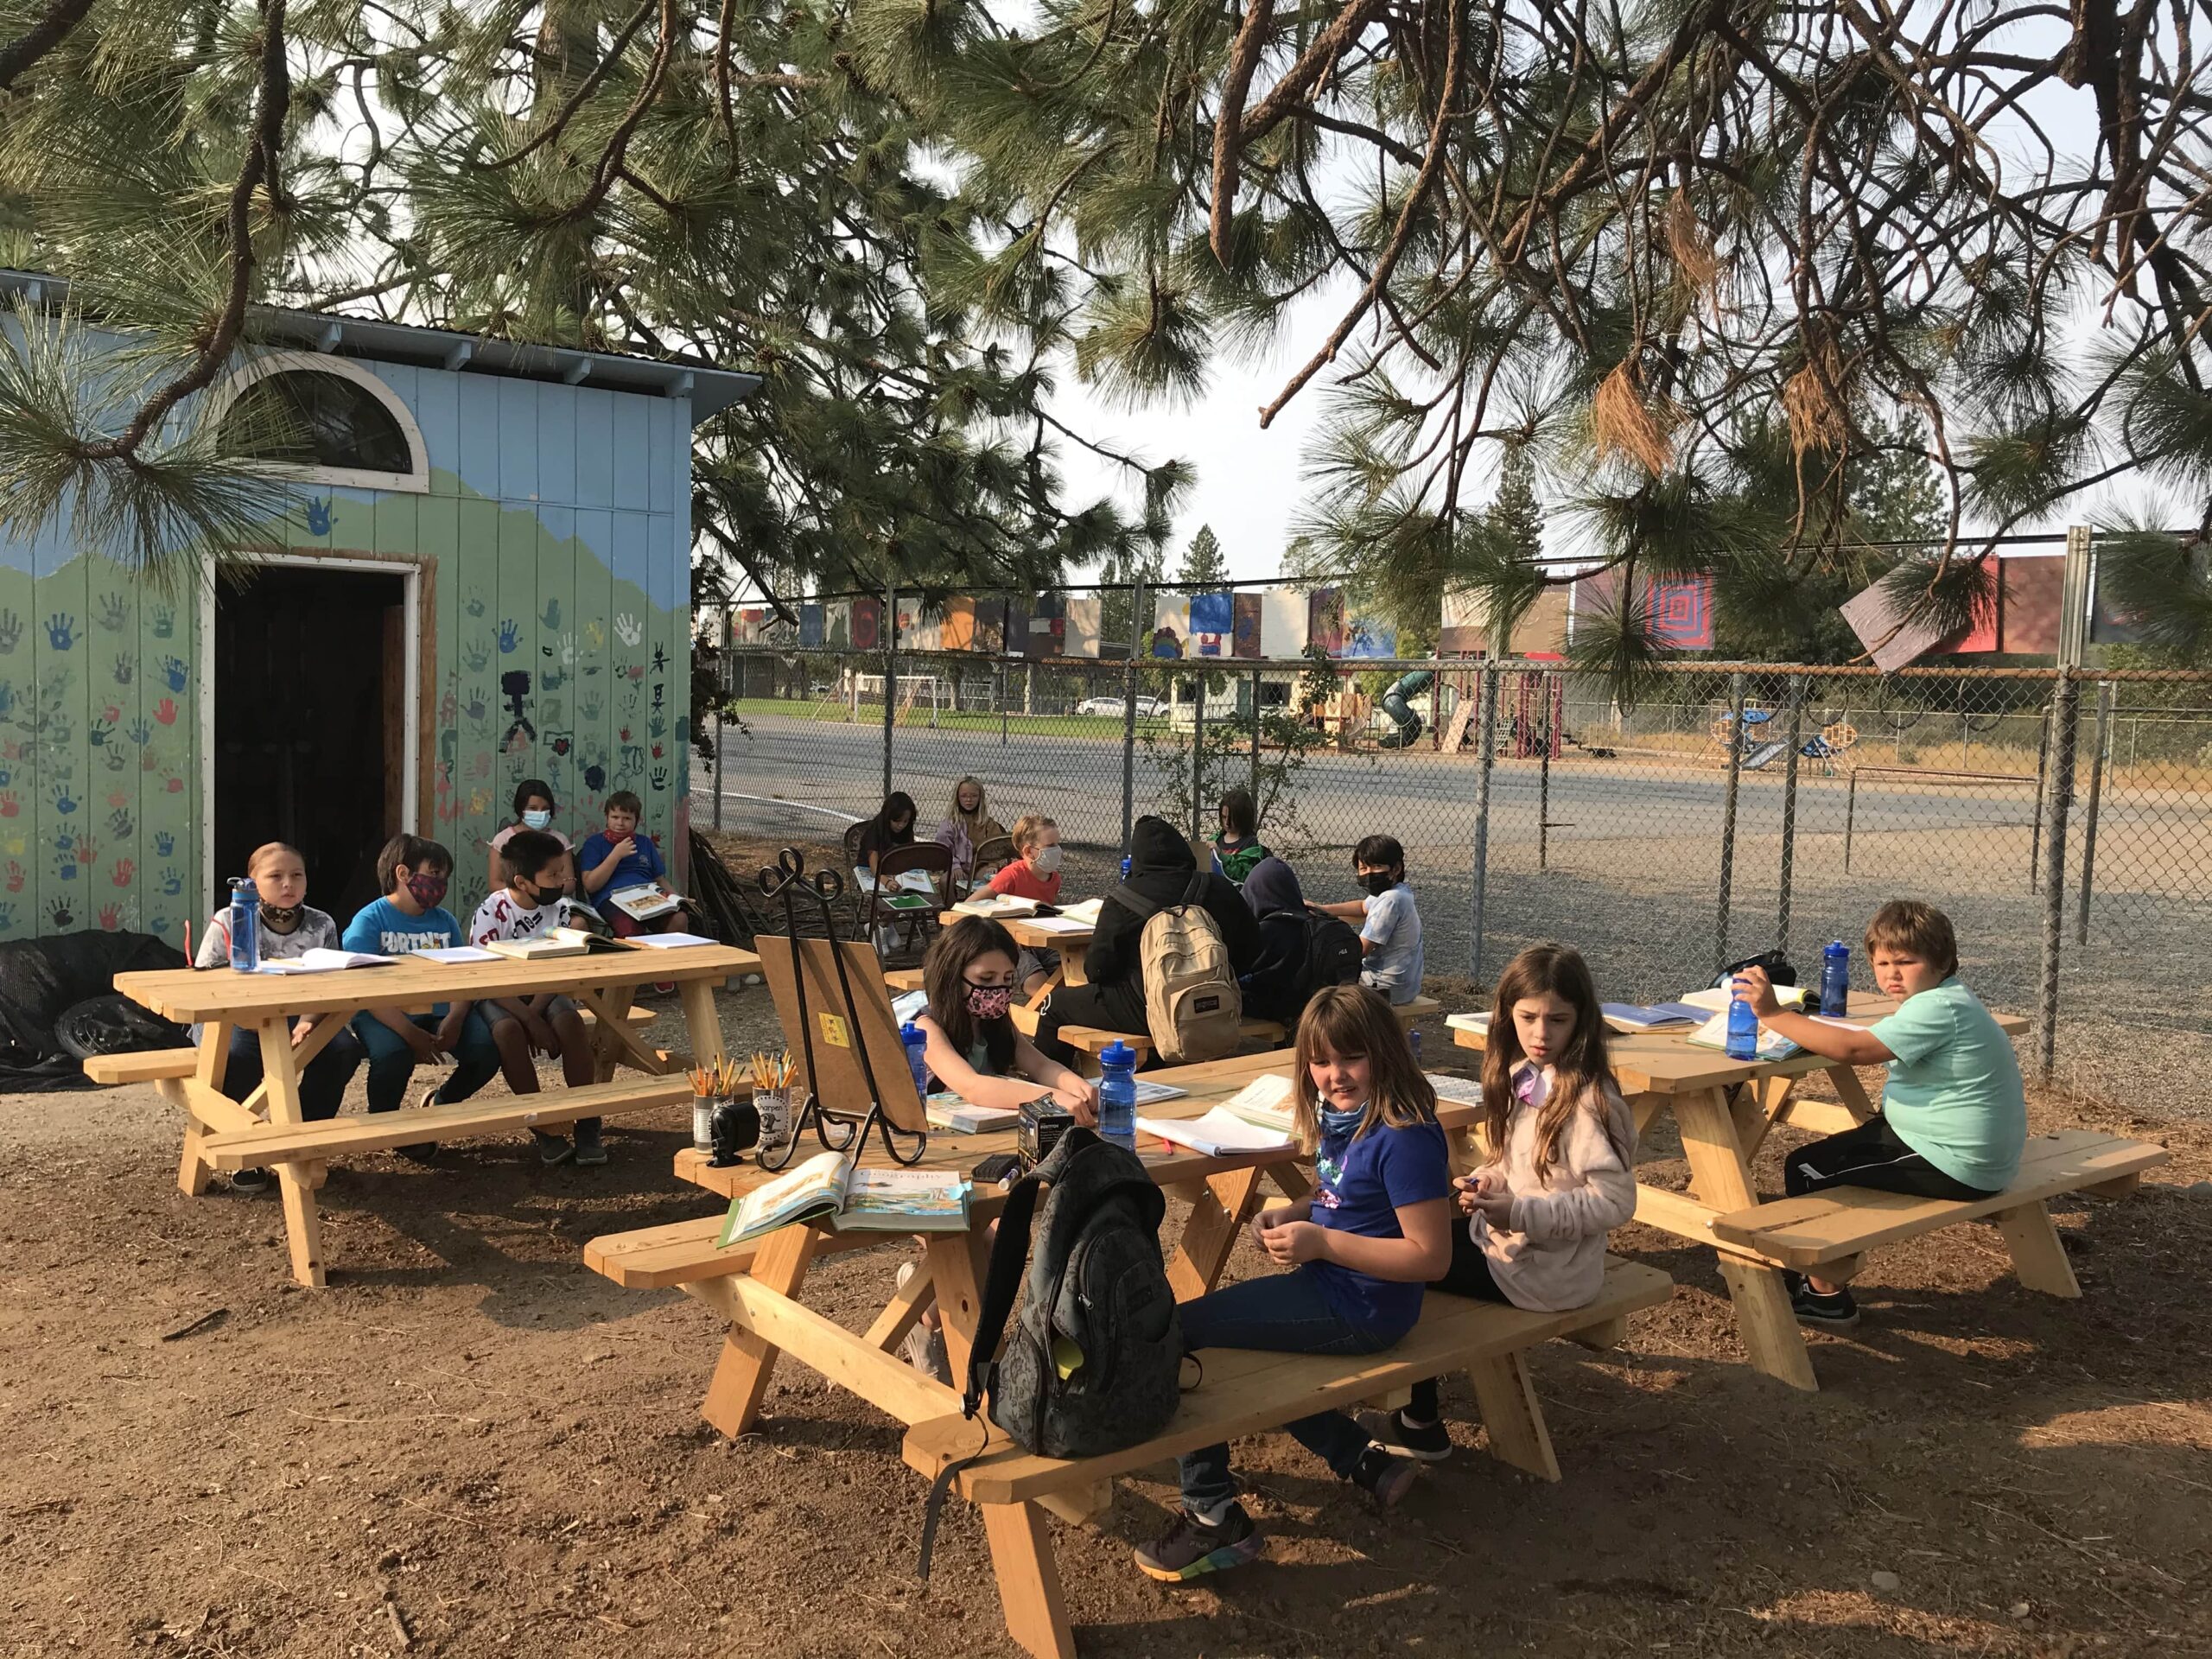 North Fork Elementary students sitting at picnic tables in their outdoor classroom